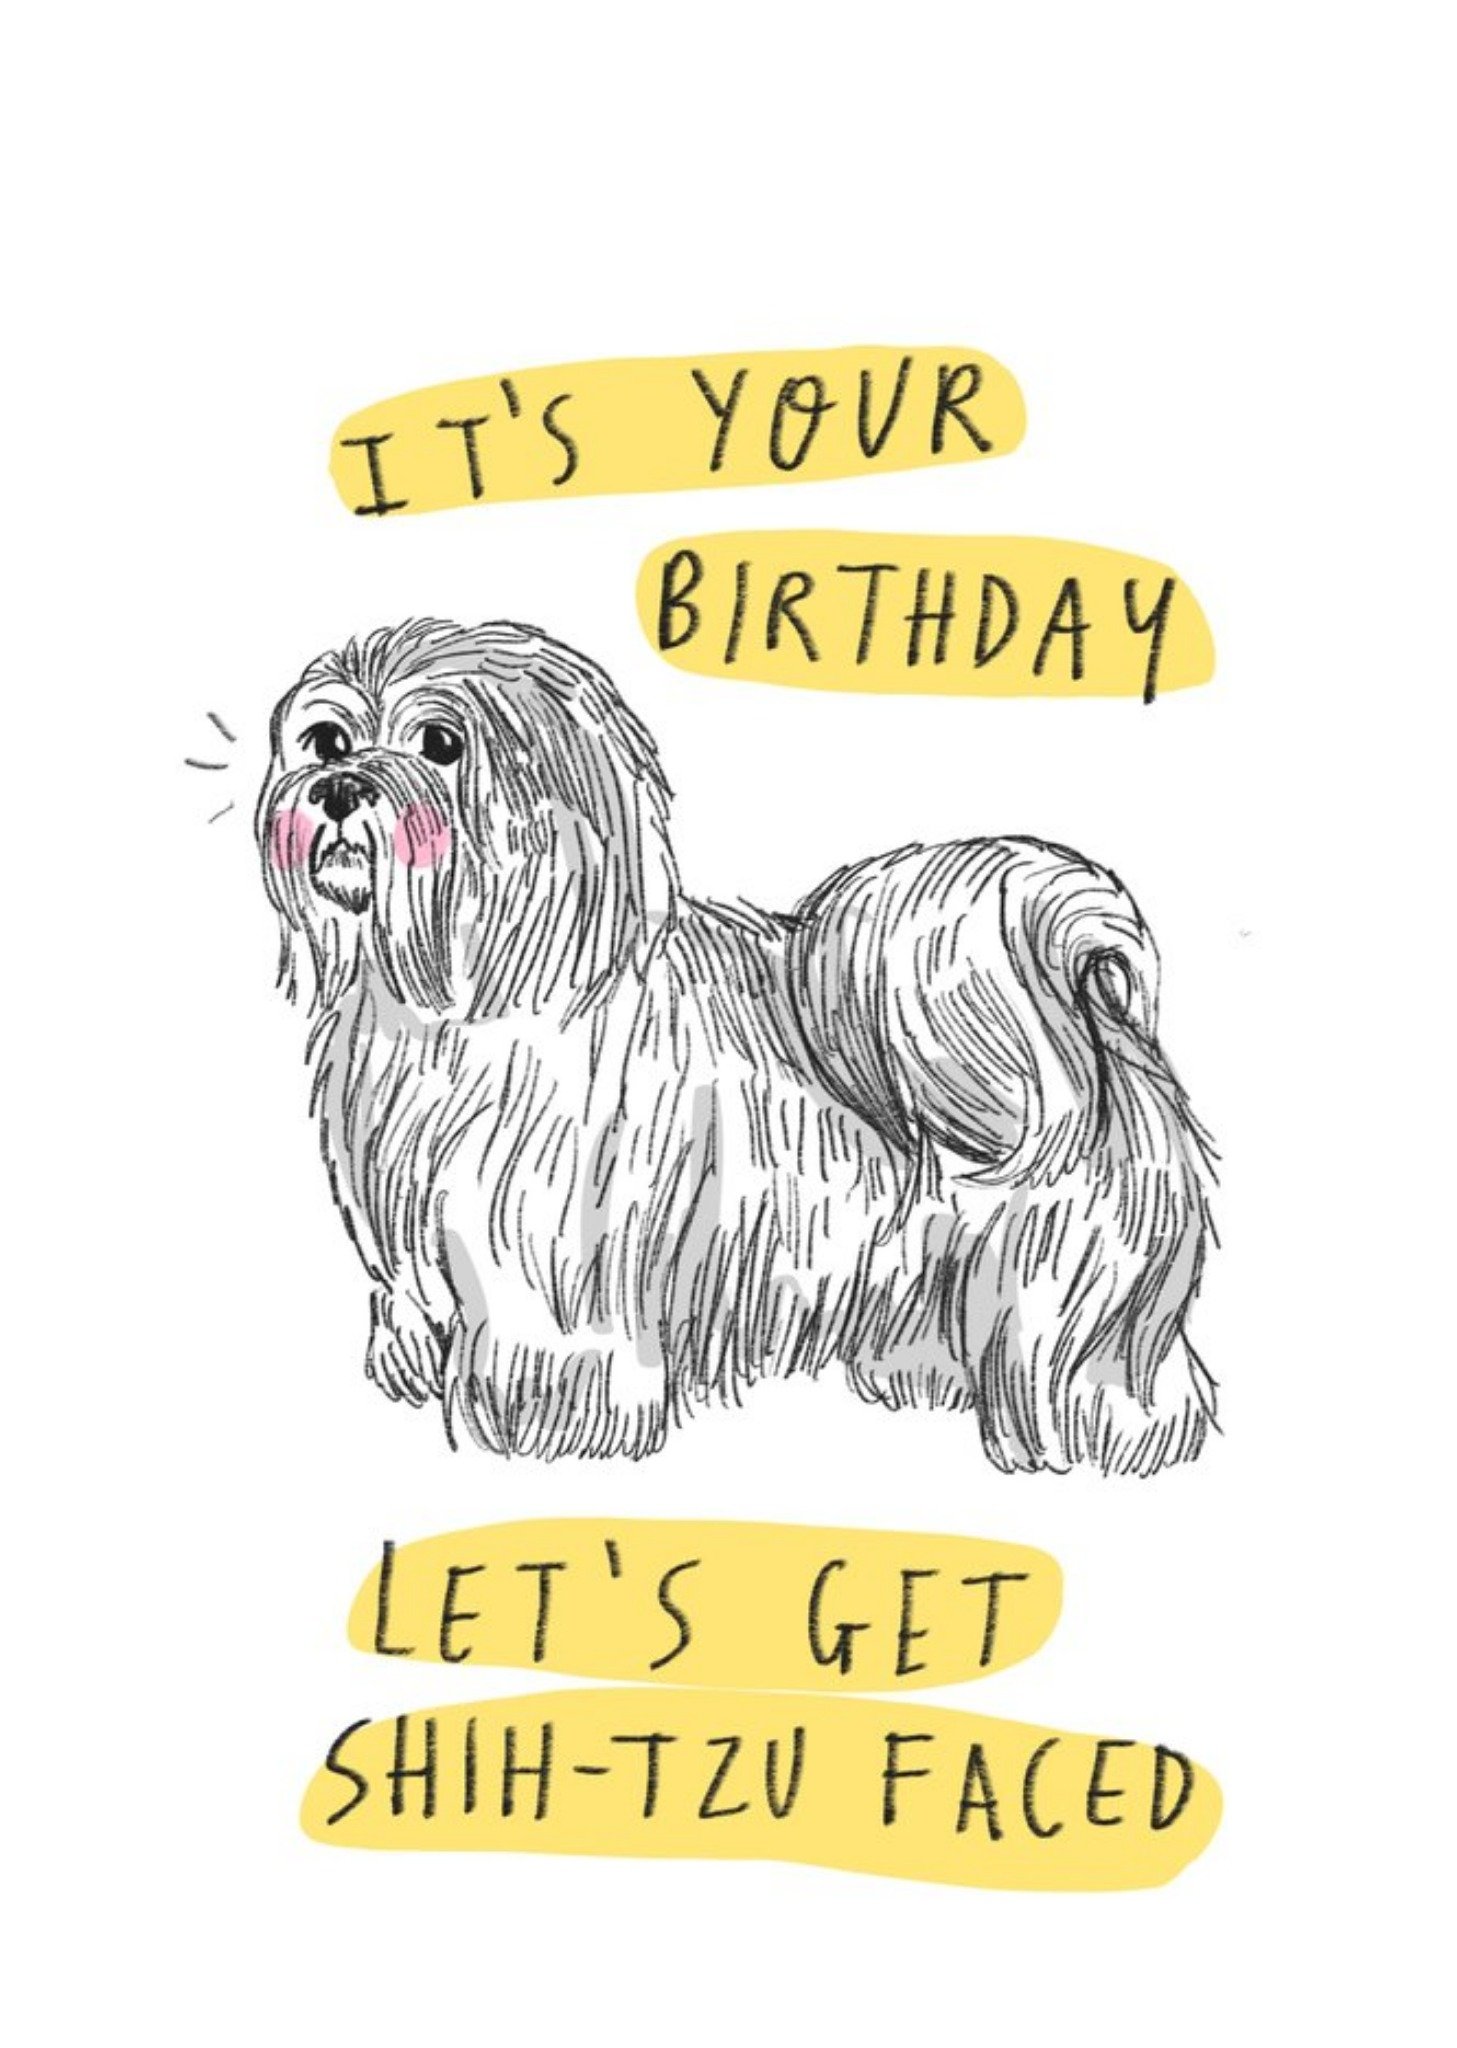 Moonpig Funny Its Your Birthday Lets Get Shih-Tzu Faced Card Ecard